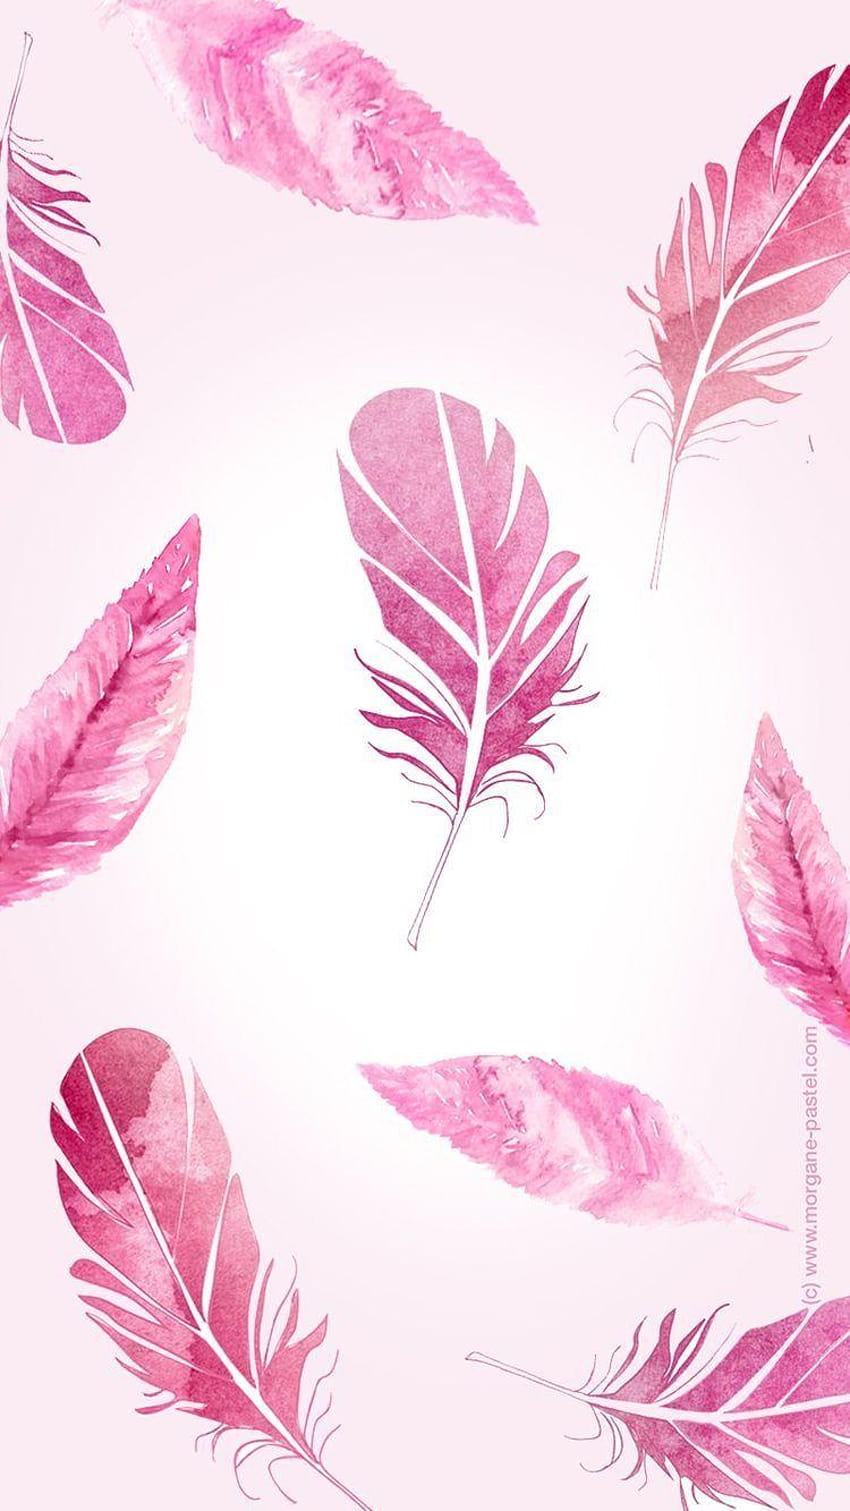 K€NDR@ on Backgrounds, bohemian feathers HD phone wallpaper